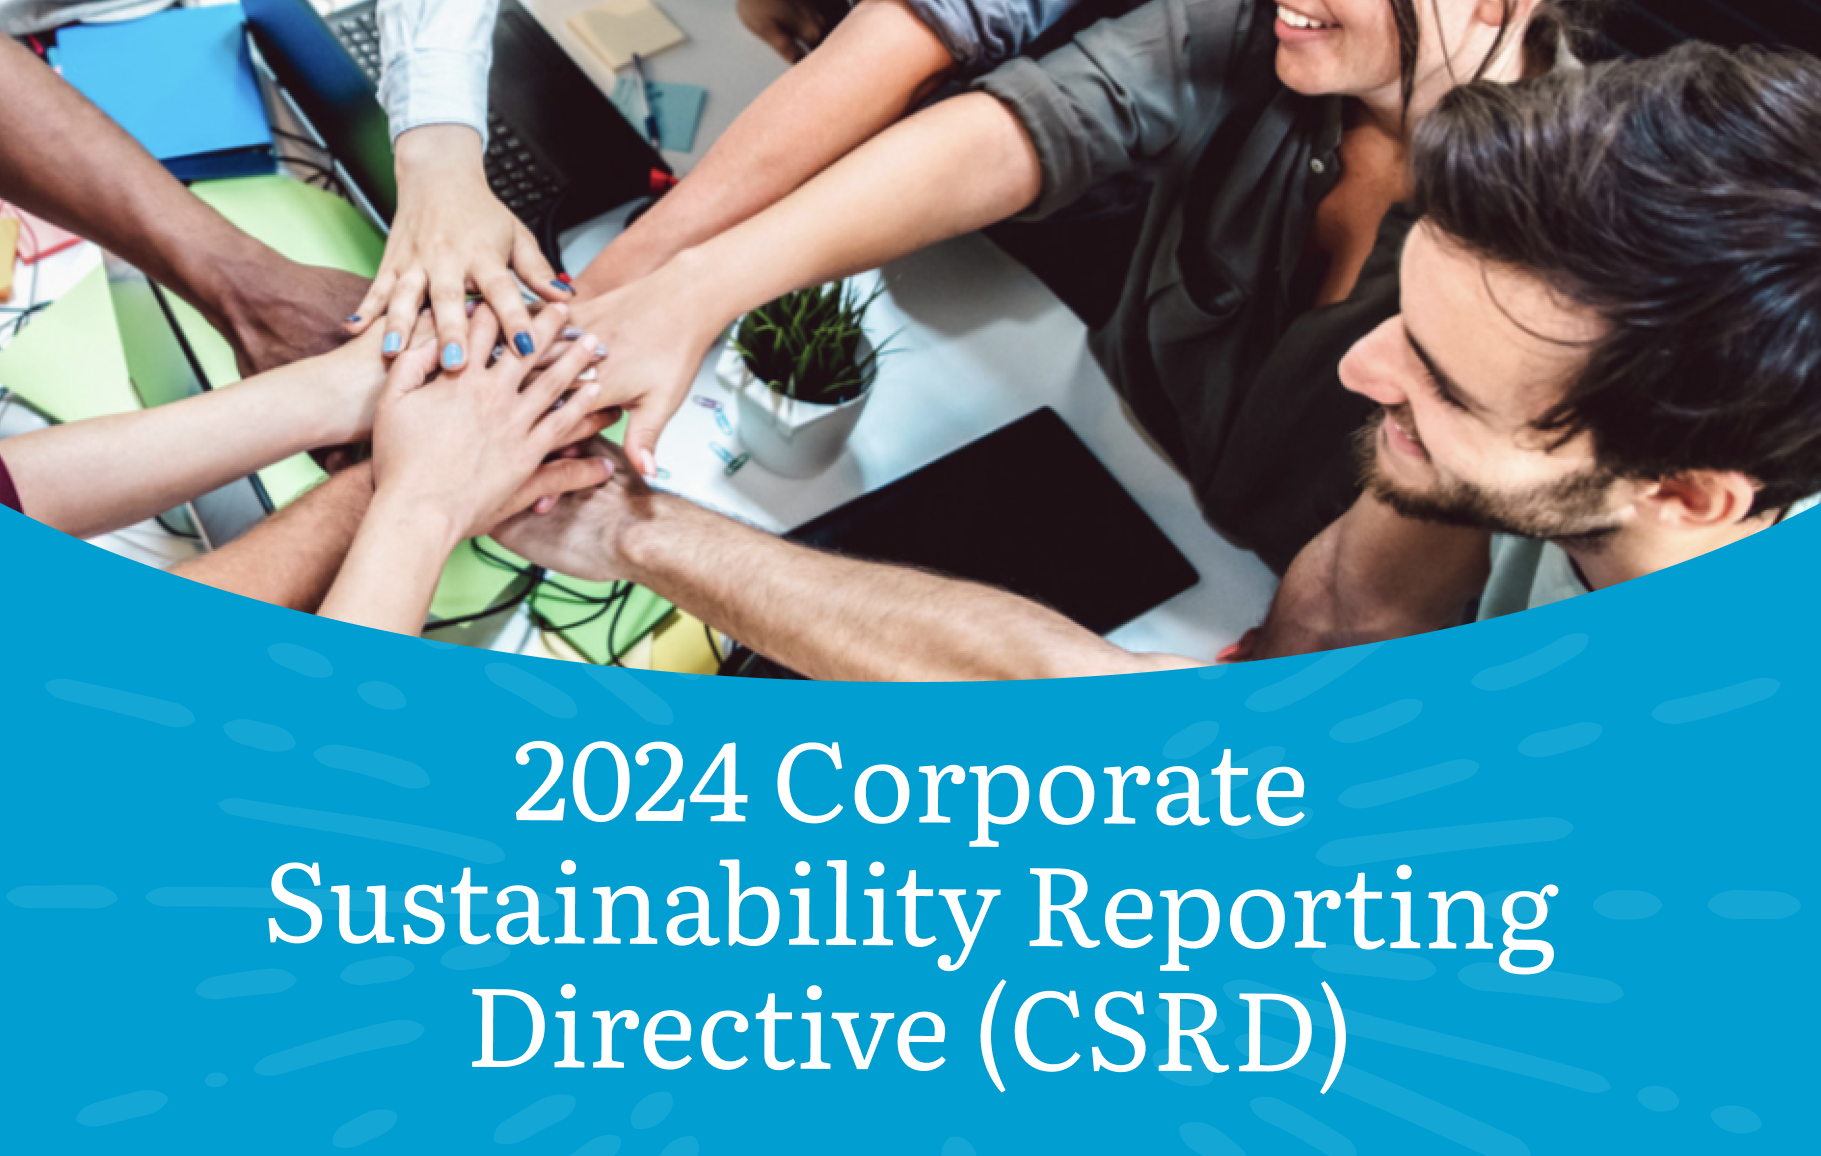 Guide to the 2024 Corporate Sustainability Reporting Directive (CSRD)